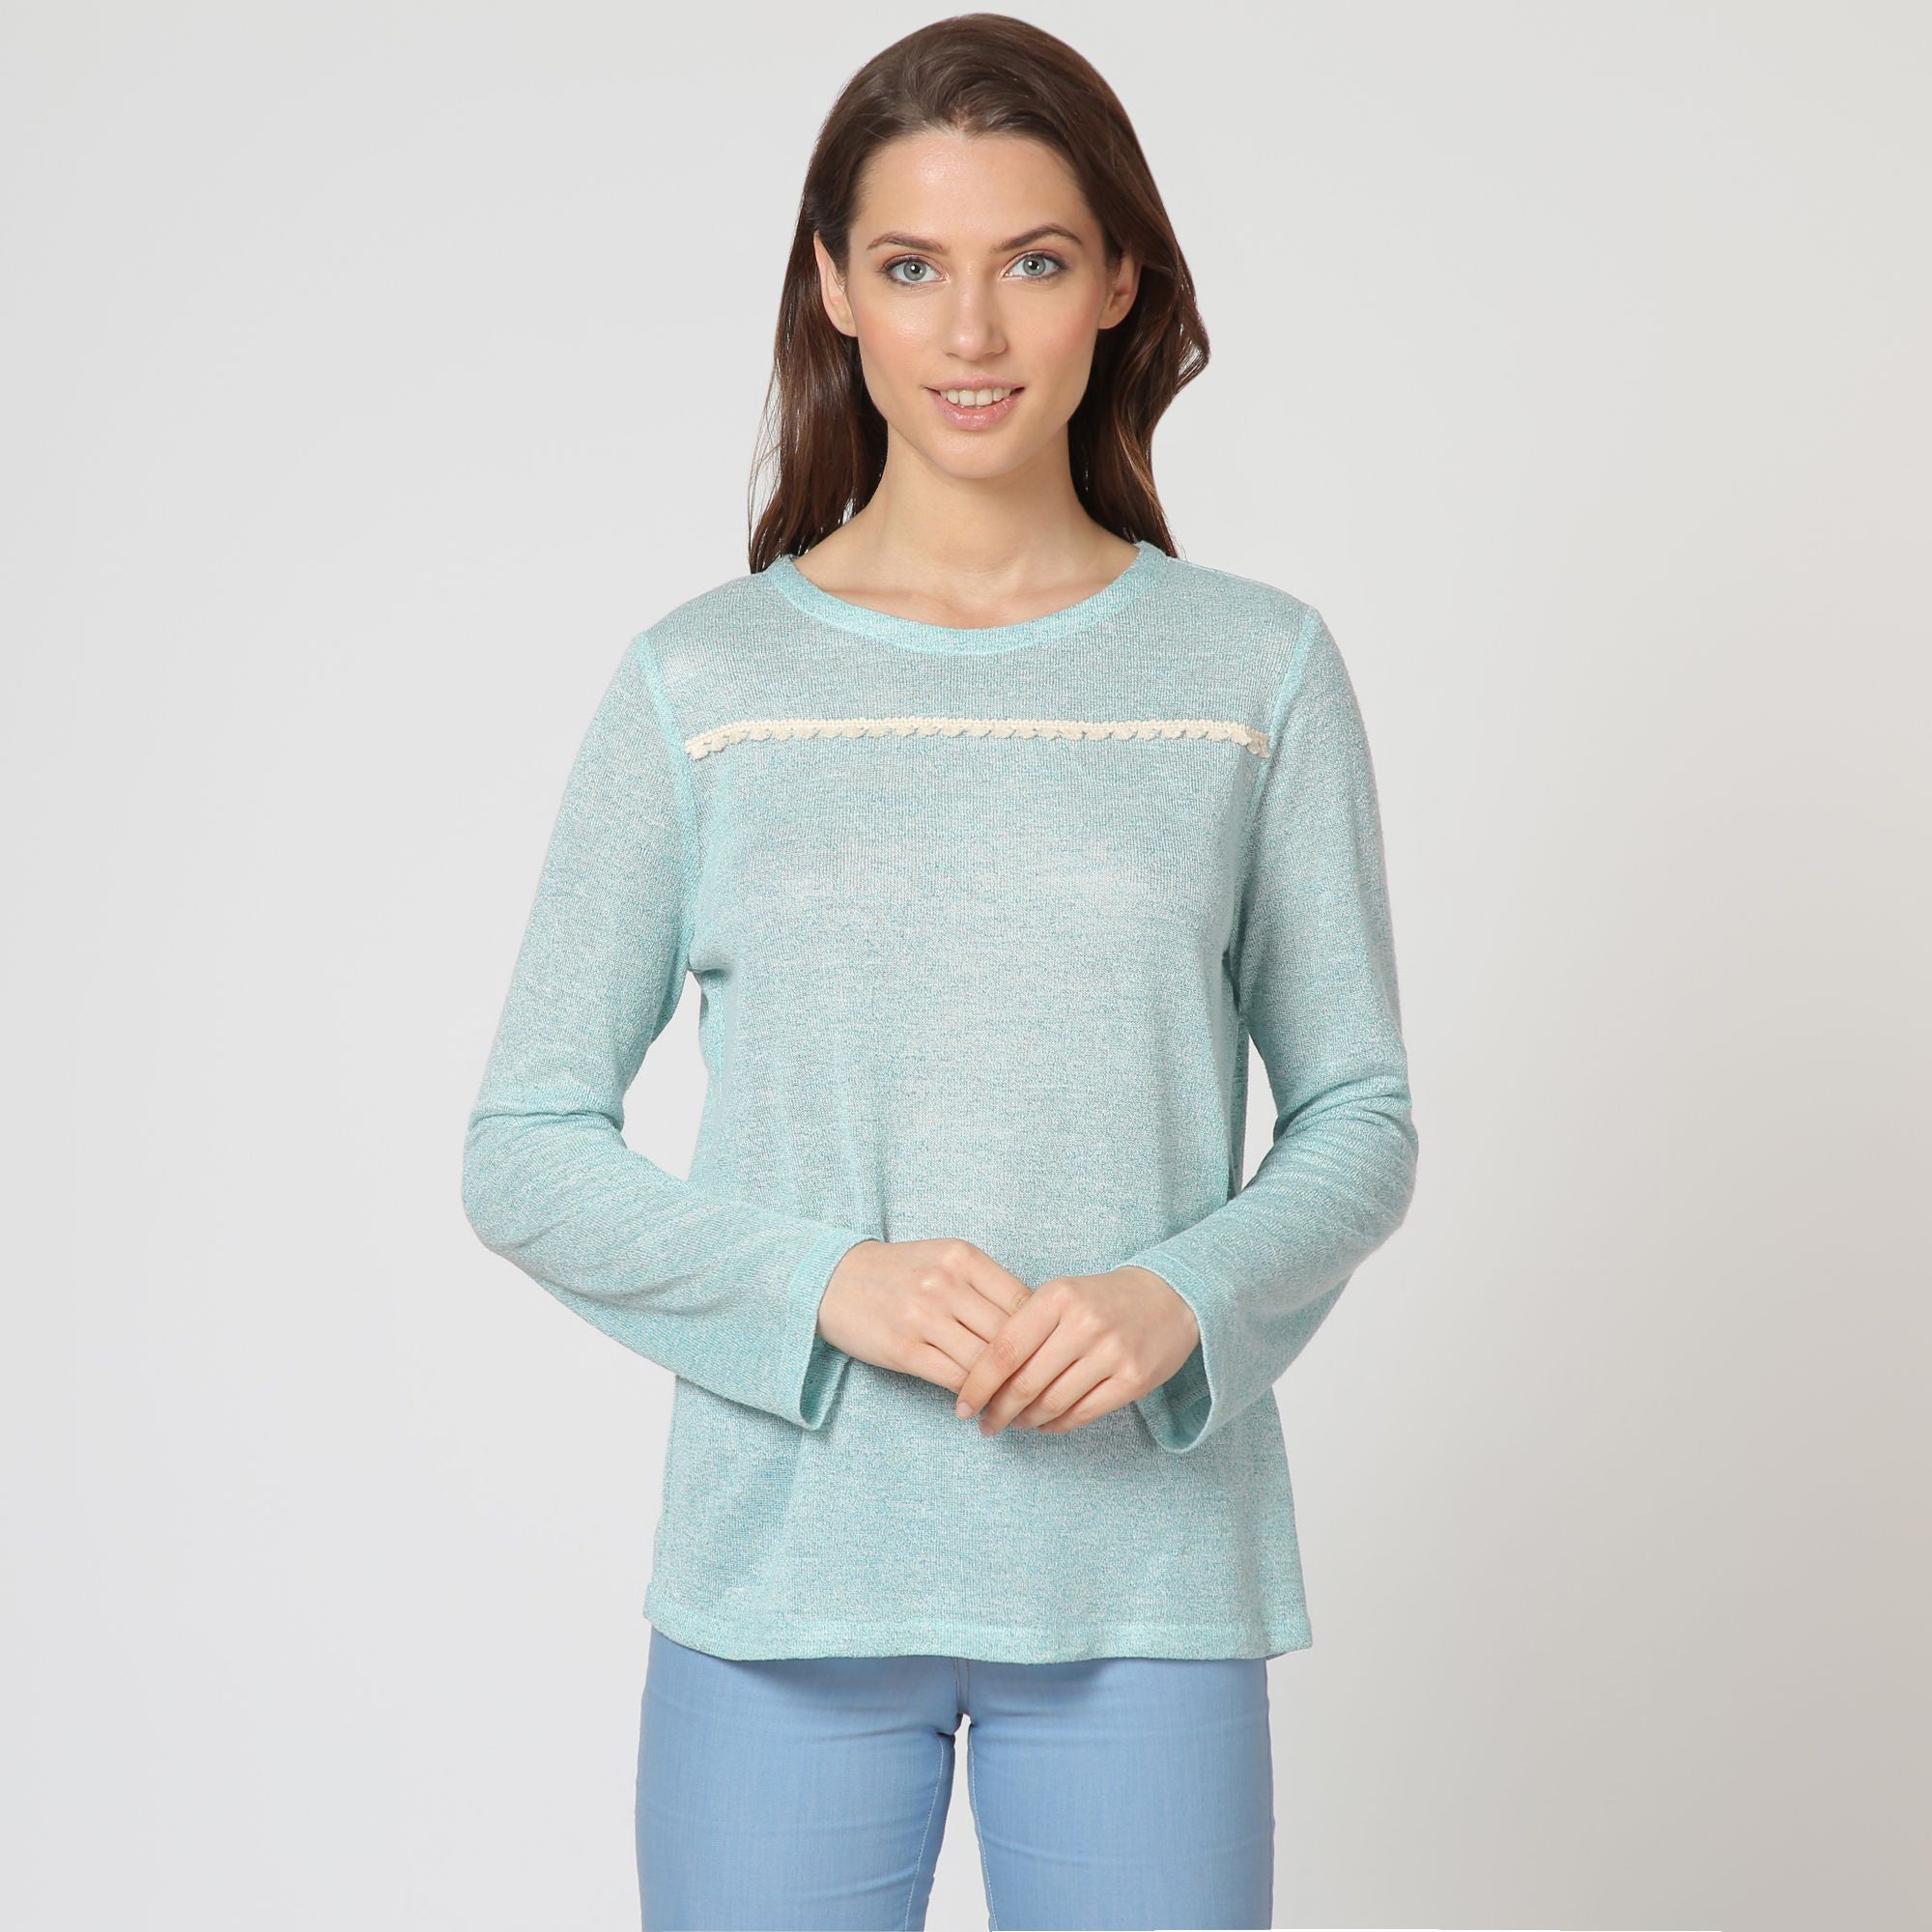 Turquoise fine knit sweater